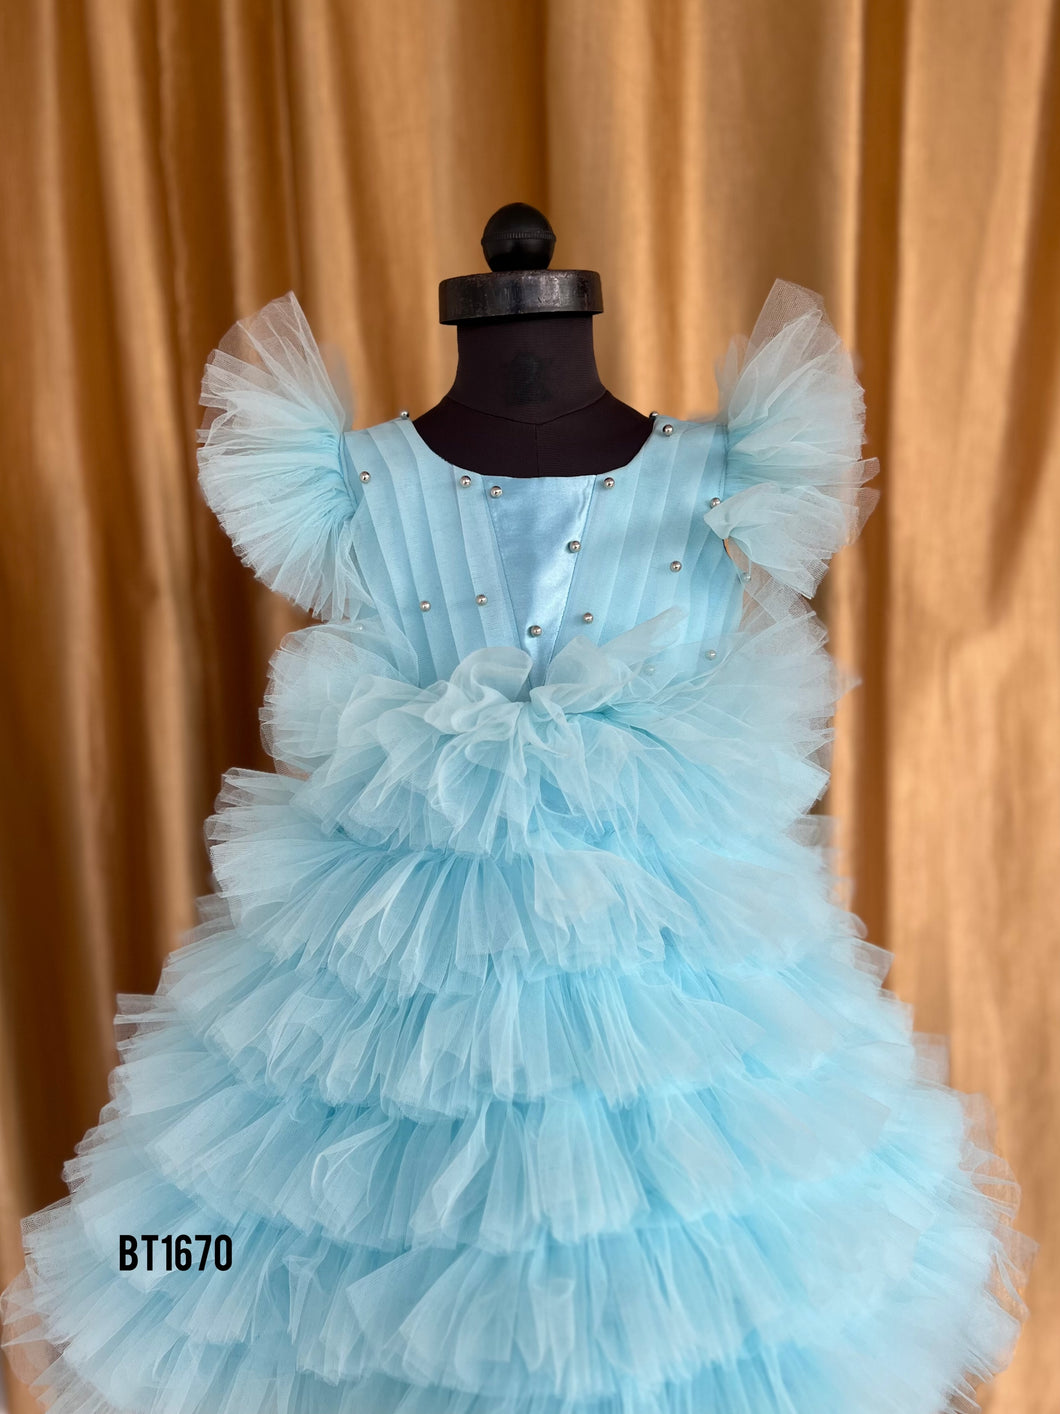 BT1670 Sky Blue Princess: Regal Party Gown for Toddlers